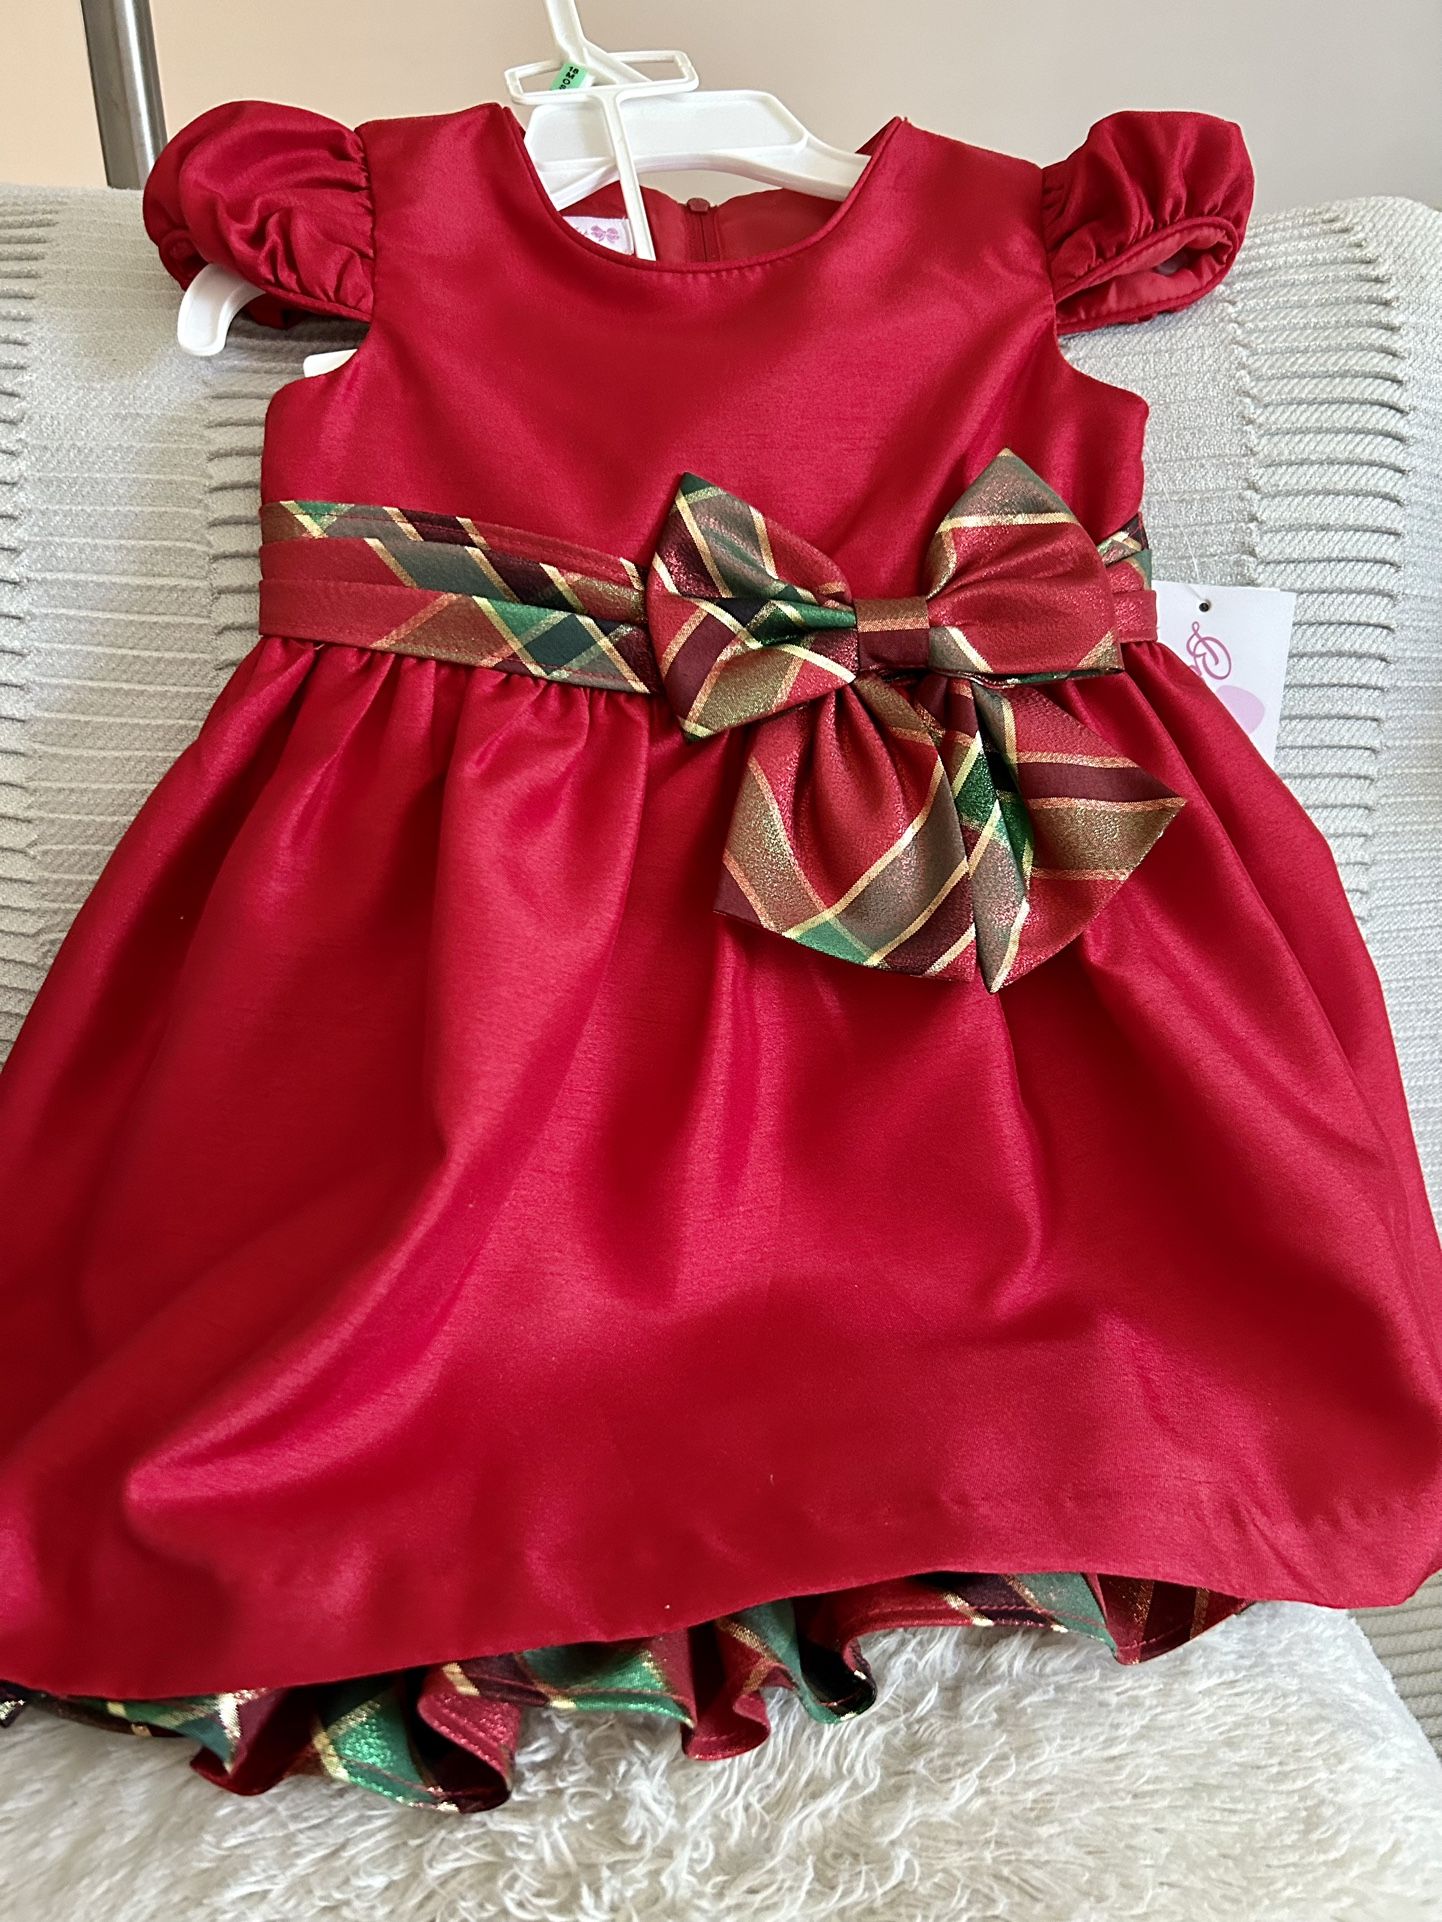 18 Months Red Girl Party Dress - Holiday Vibe 